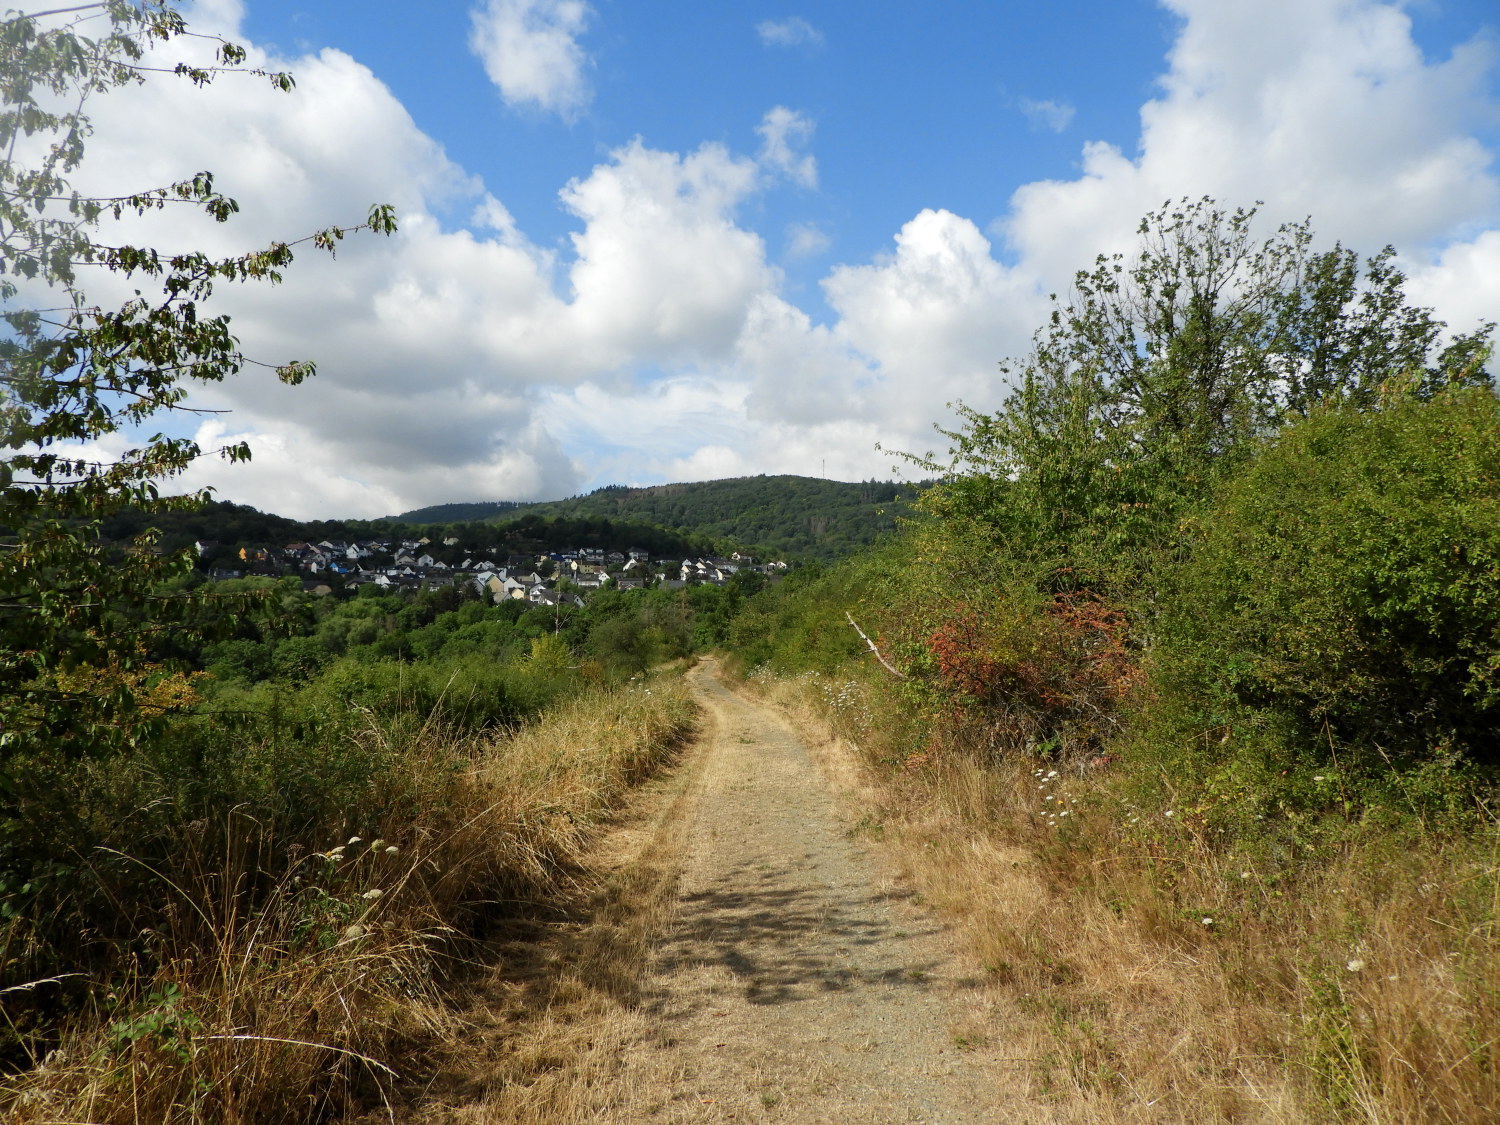 The path leading to Weiler